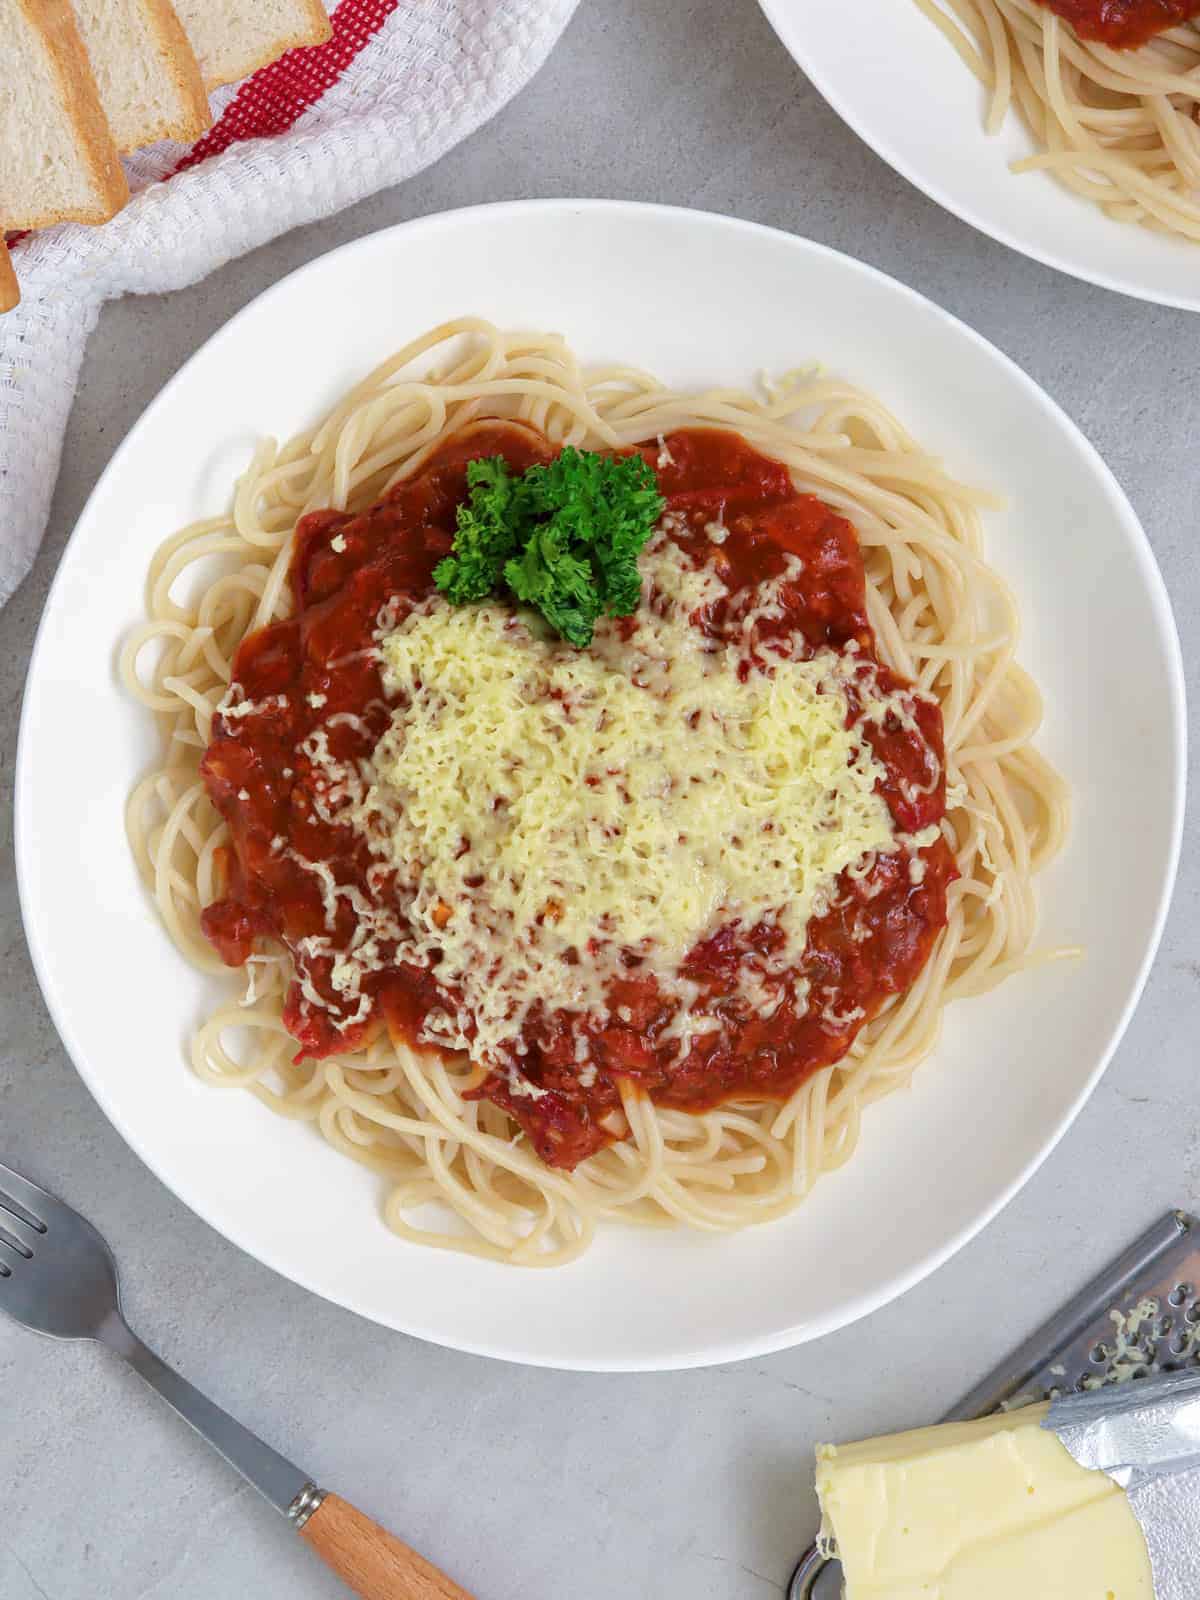 filipino-style spaghetti with corned beef on a white plate